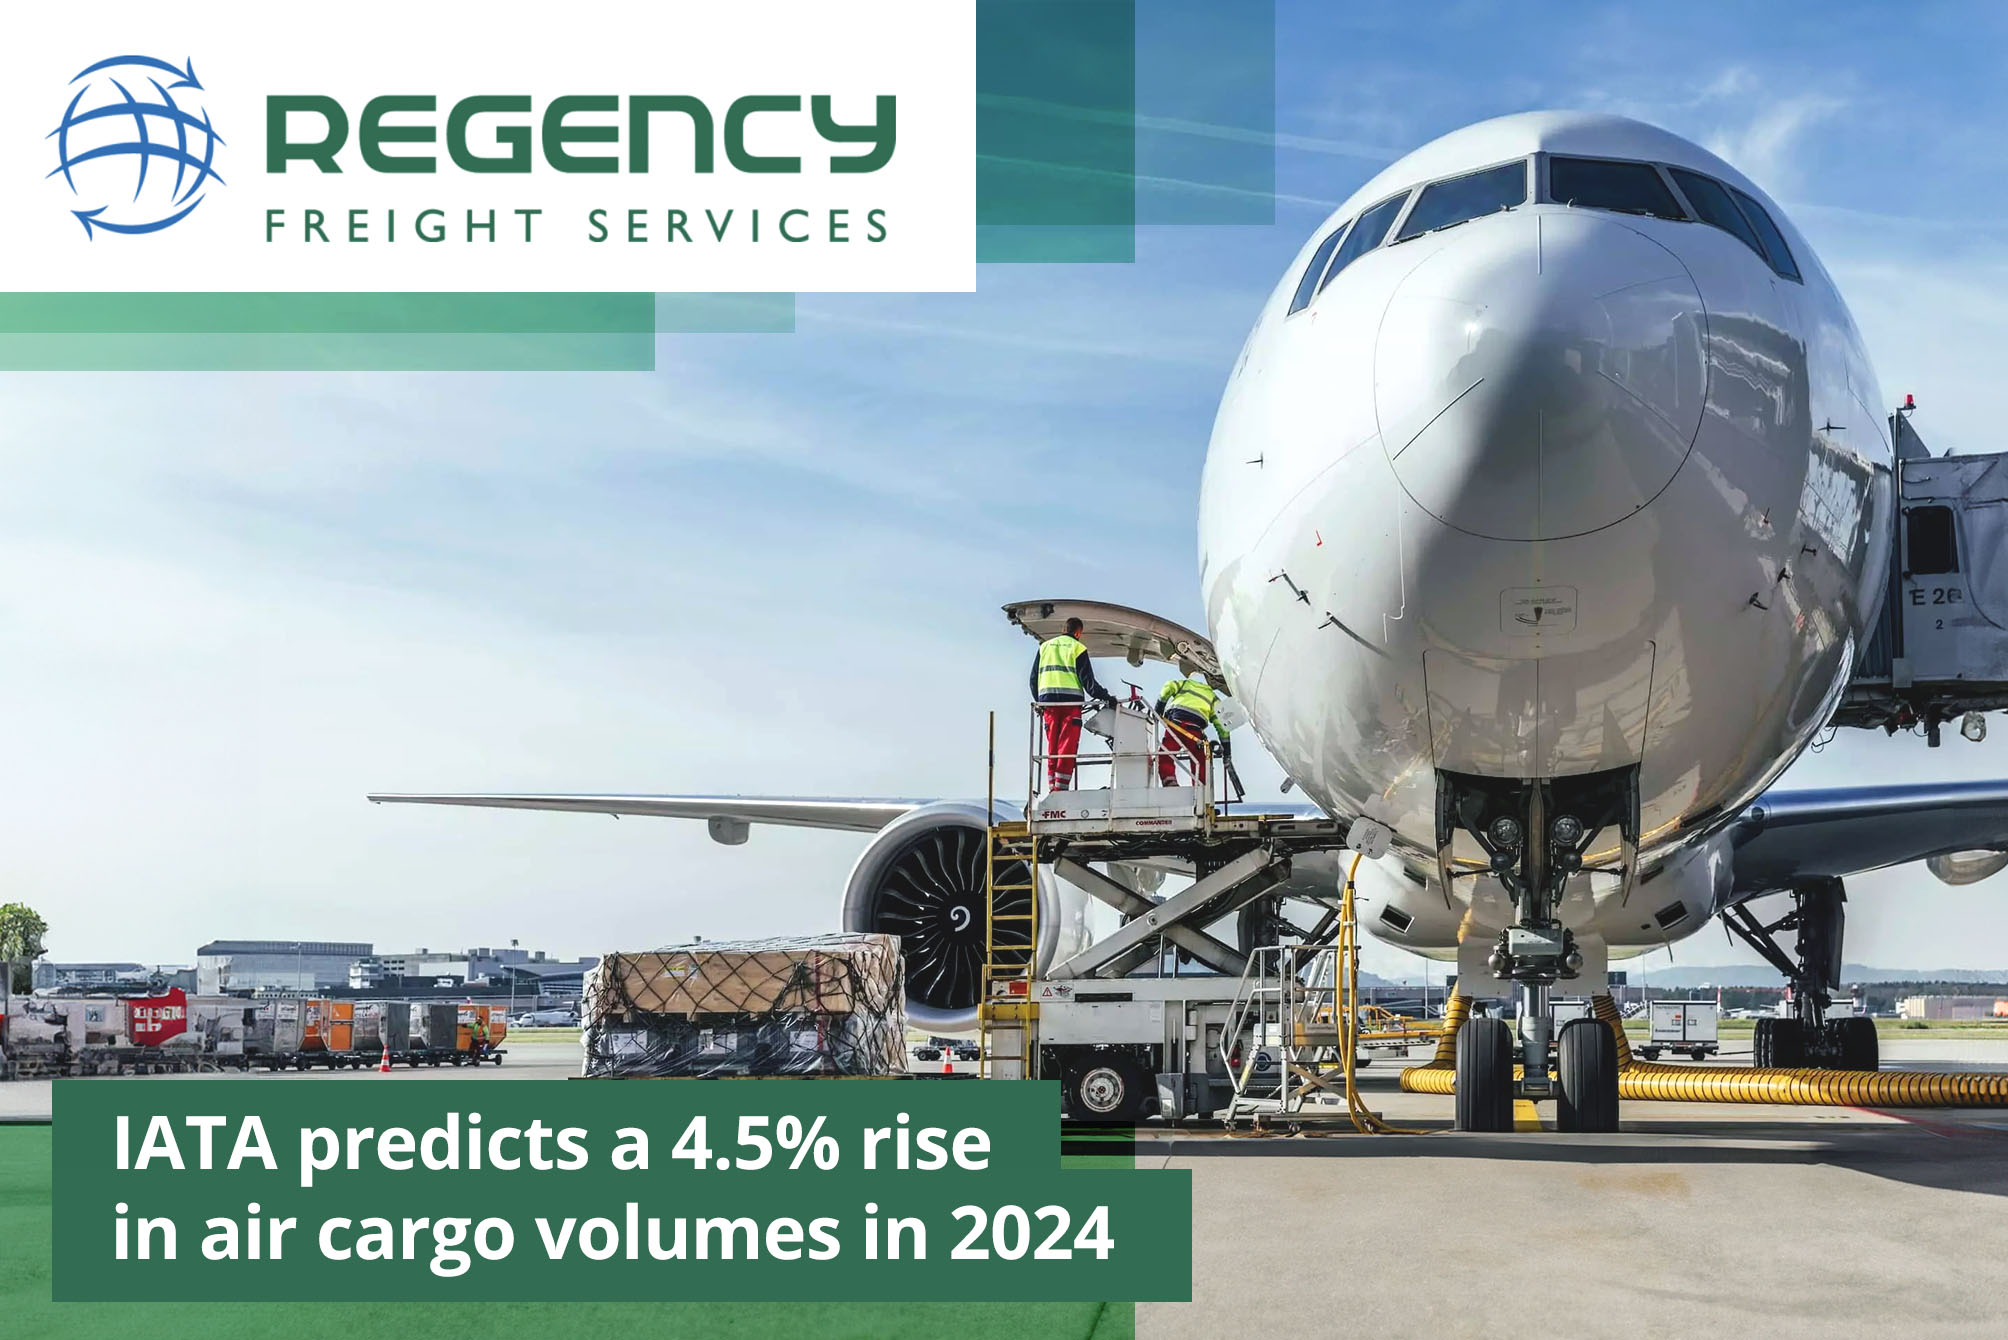 IATA predicts a 4.5% rise in air cargo volumes in 2024